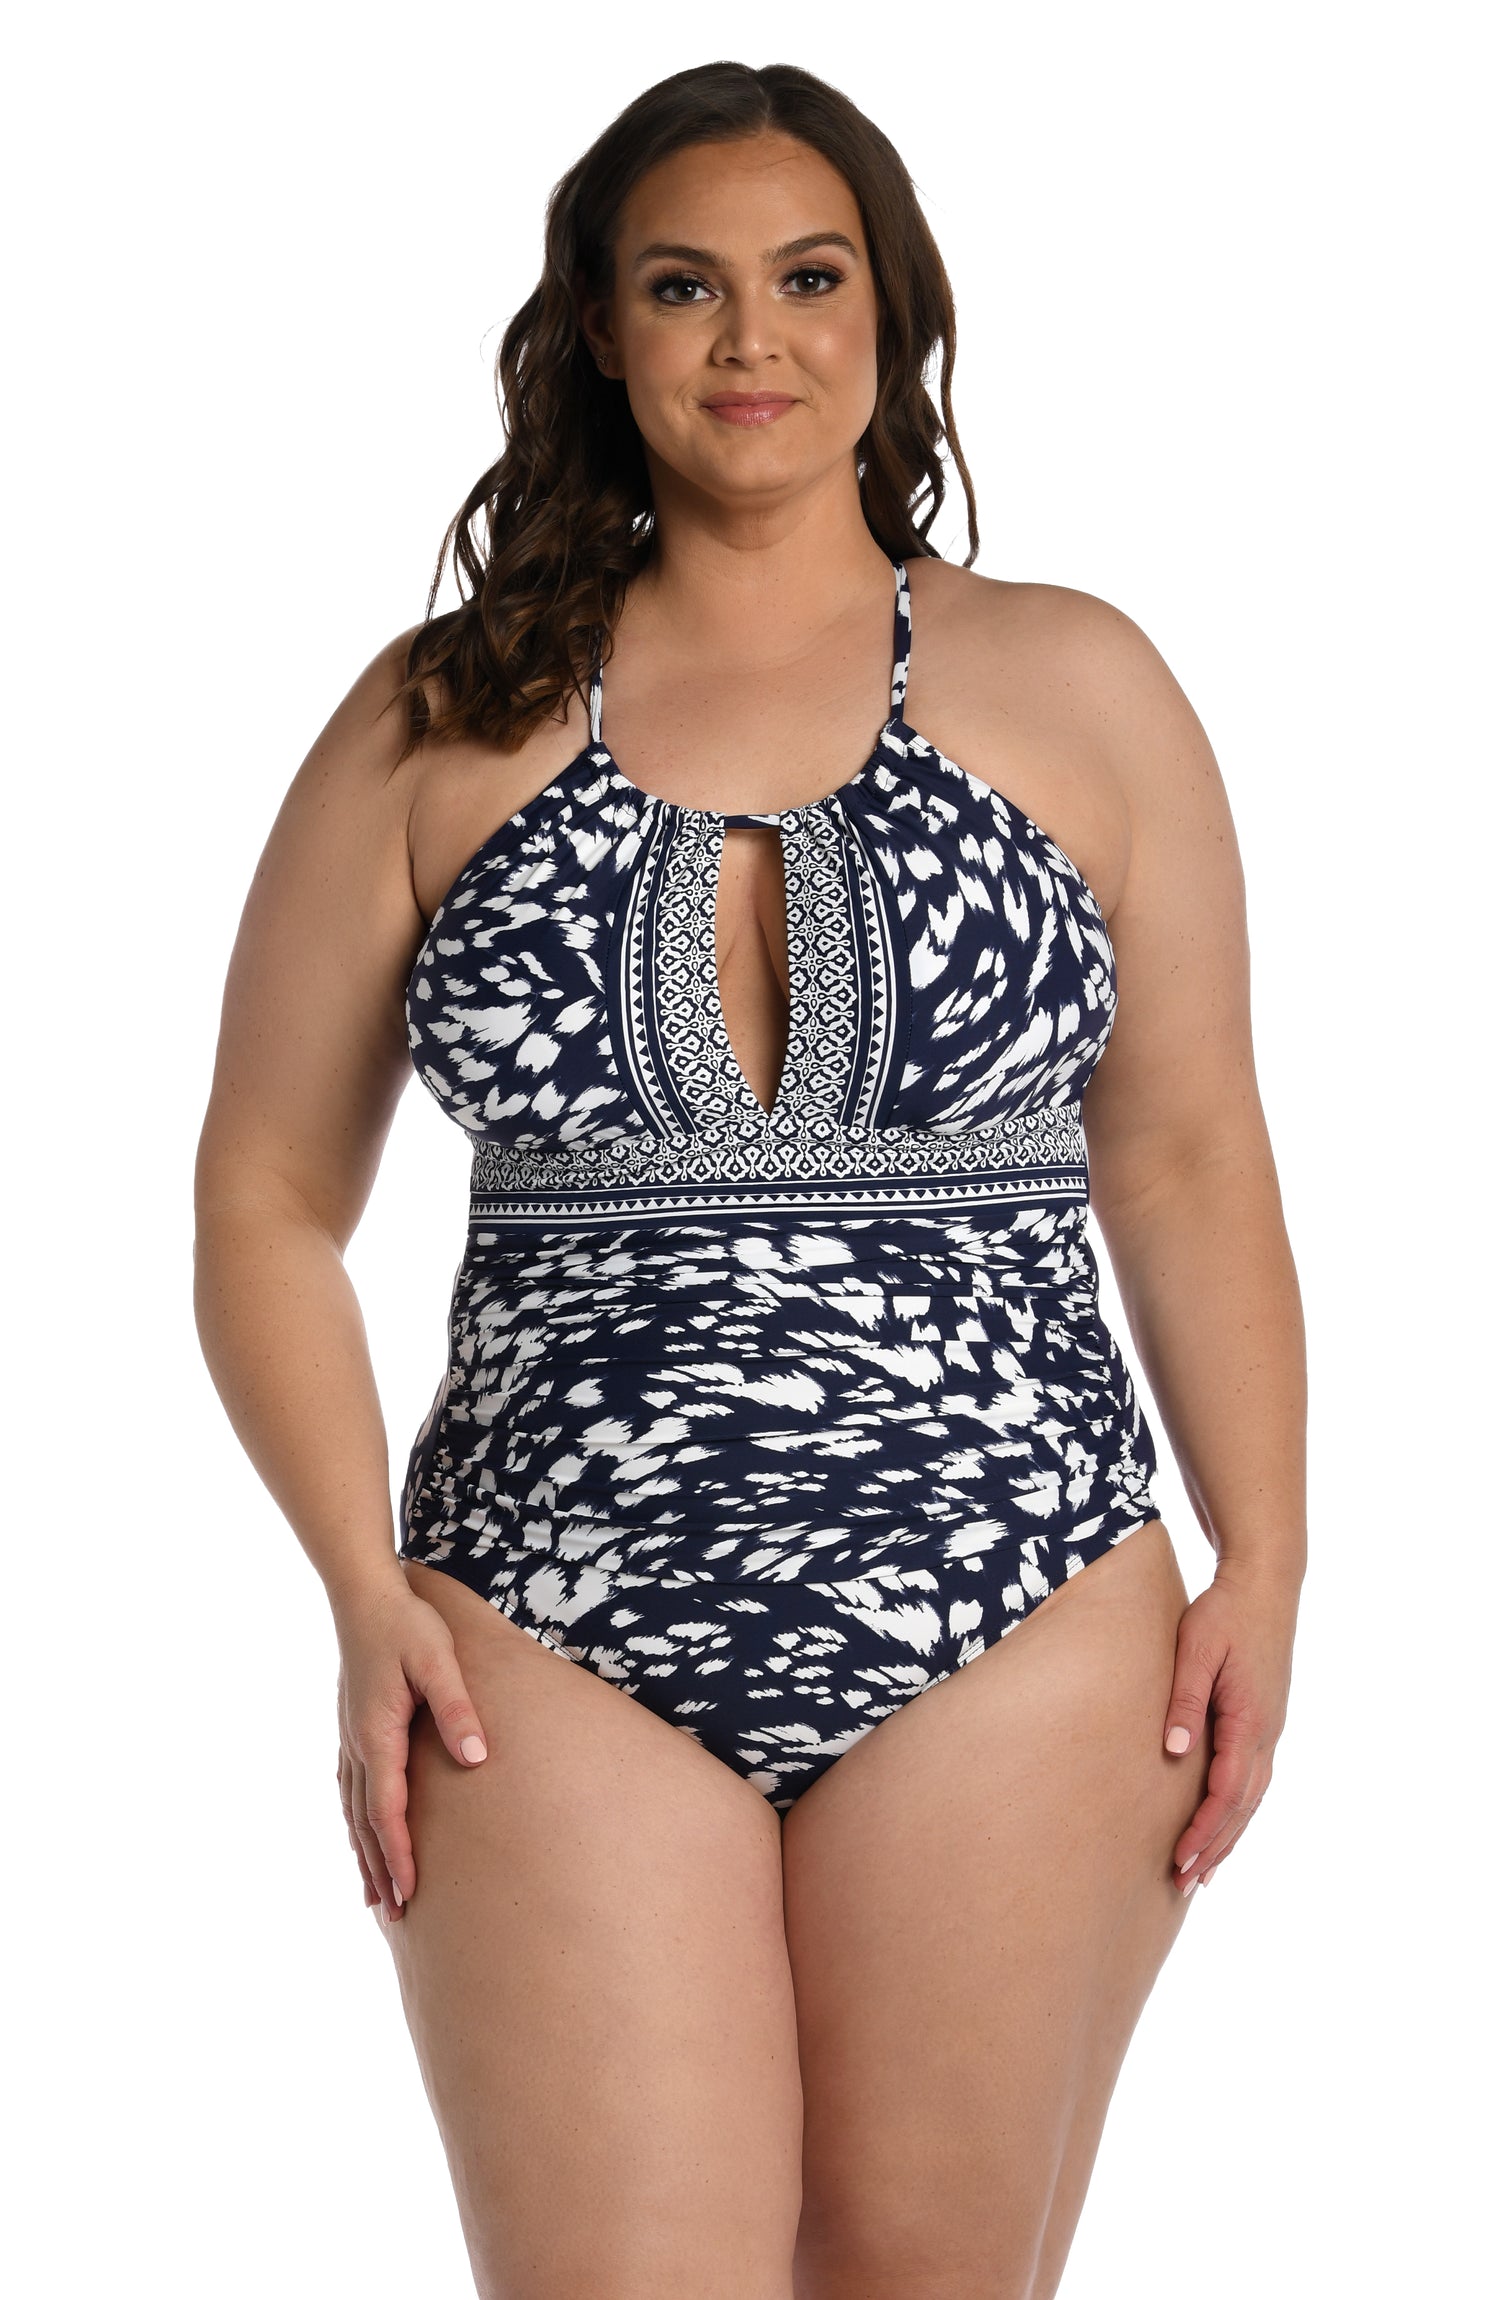 Tummy Control Tankini Sets Swimwear With Skirt Plus Size Swimwear With Built  In Bra High Neck One Piece Bathing Suit Bathing Suits That Cover Back Swim  Top With Built In Bra Boho